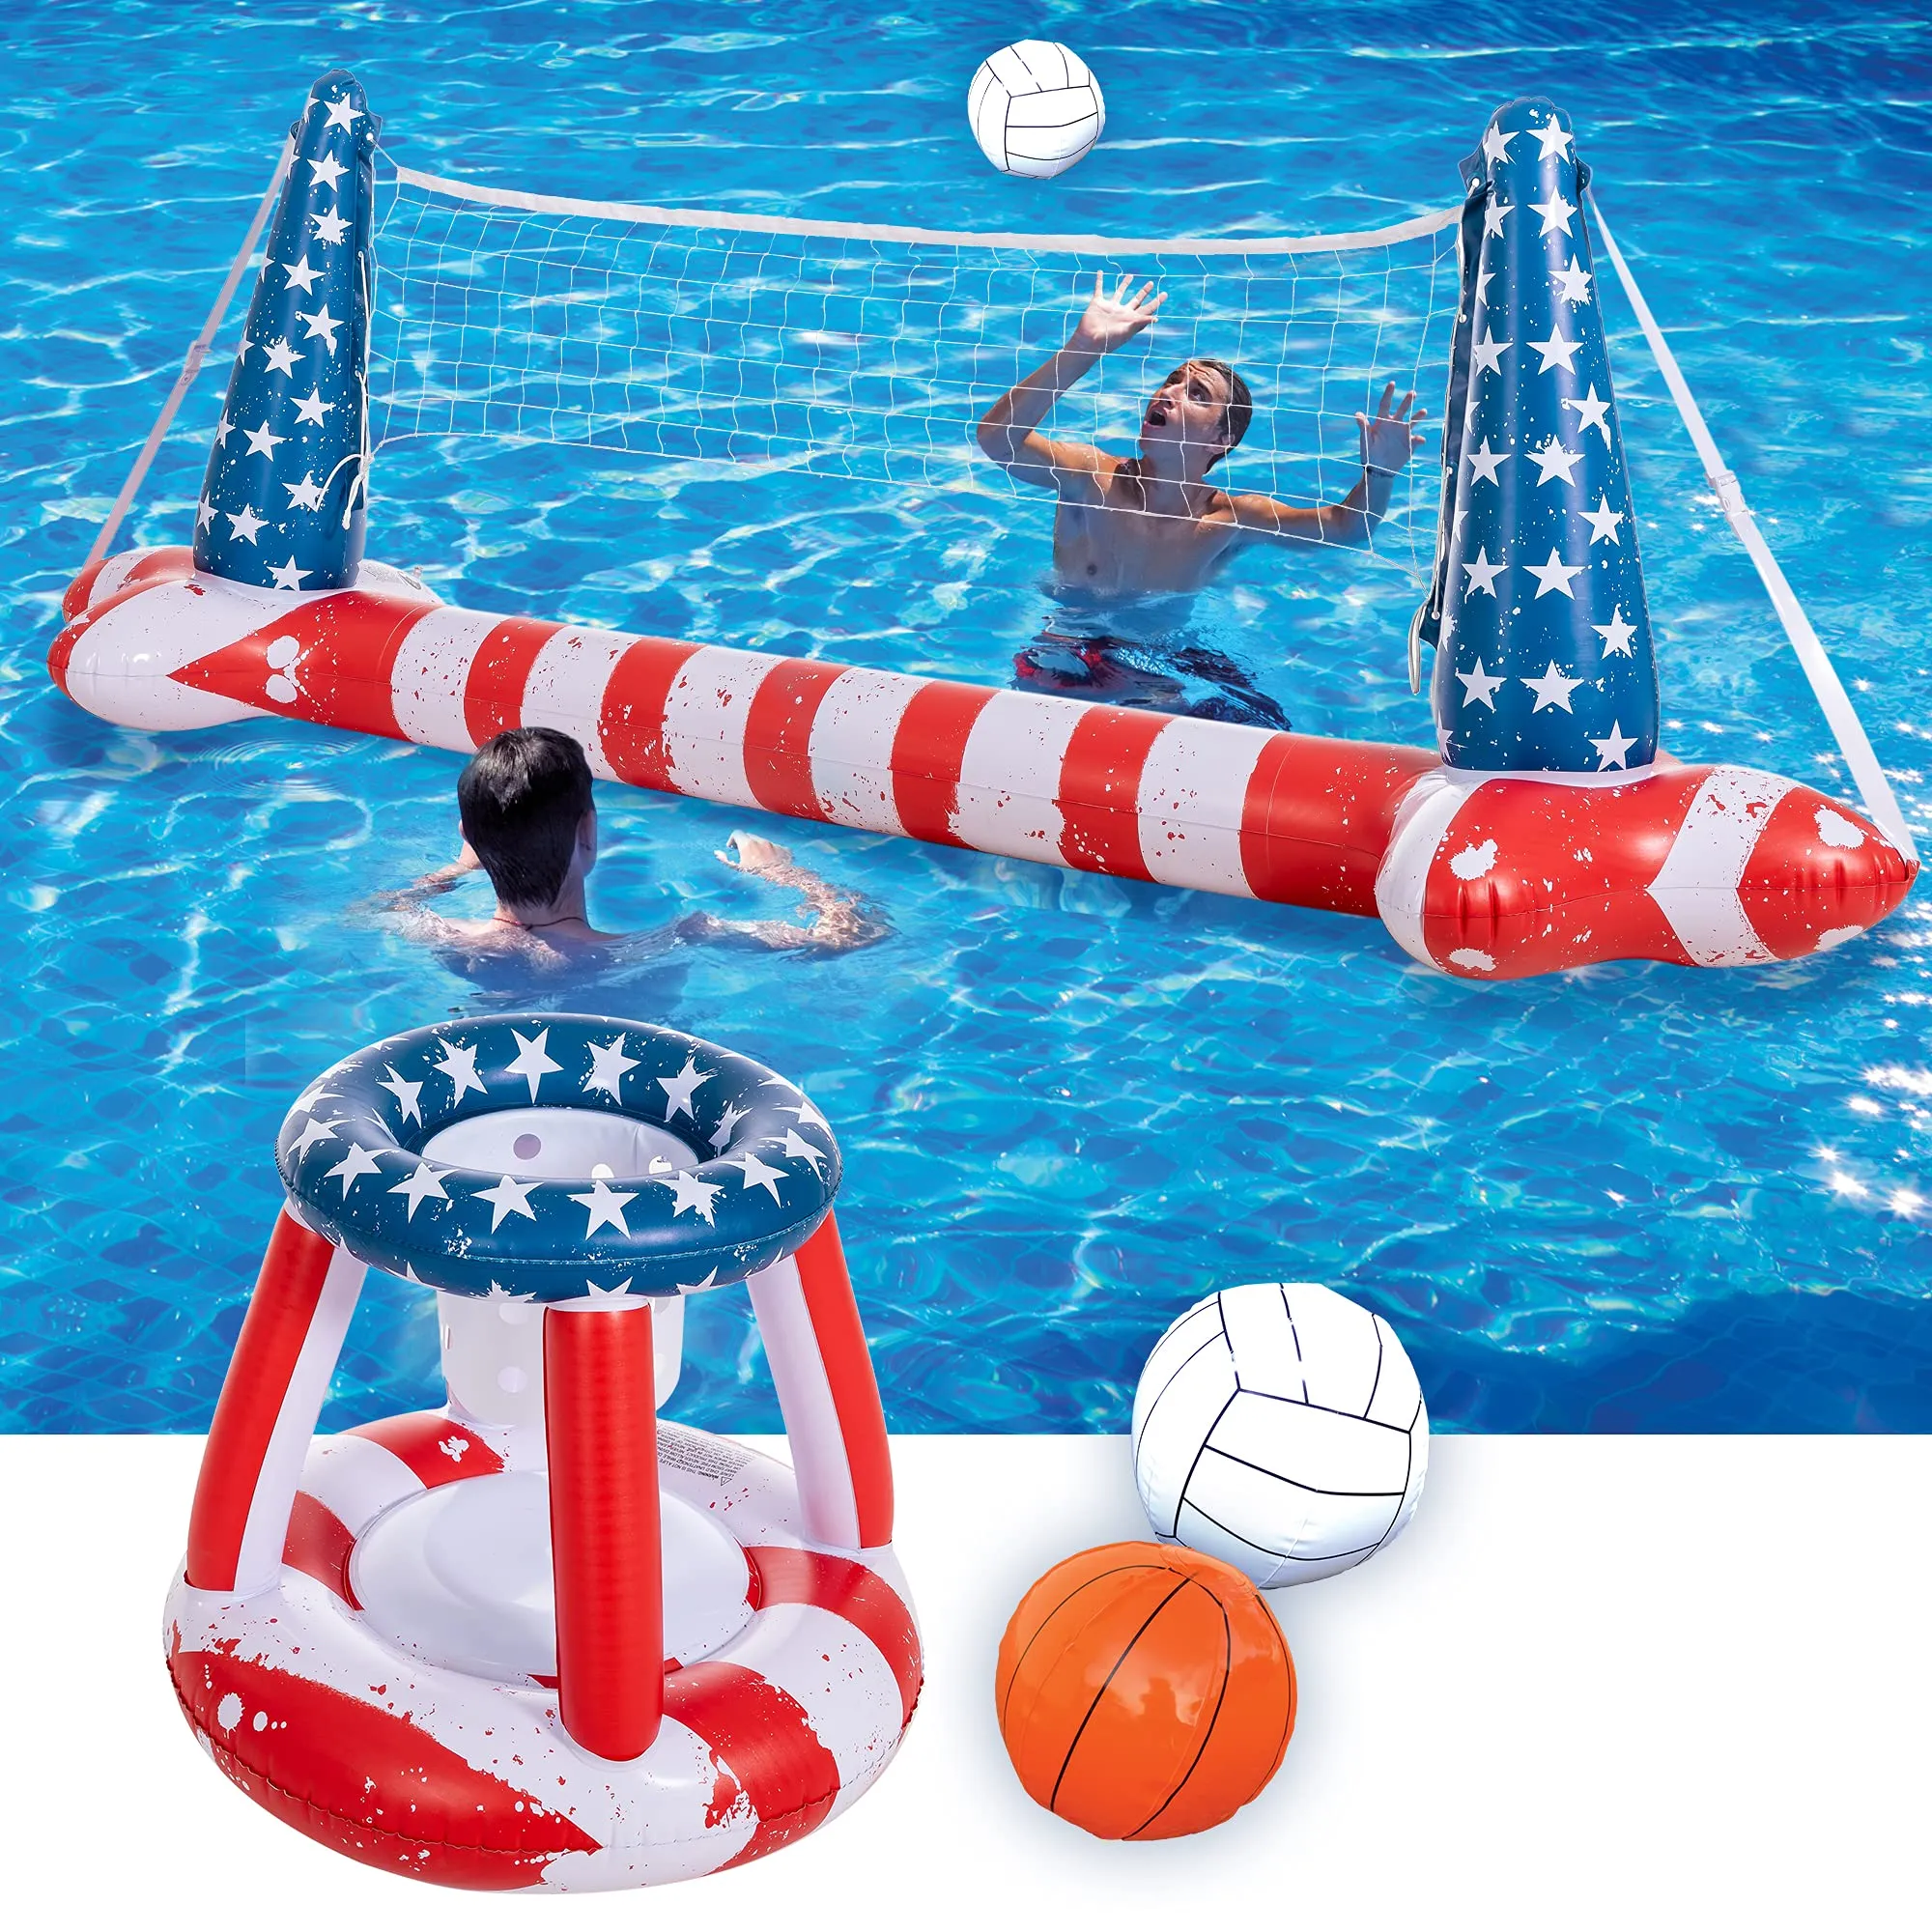 Outdoor Inflatable Water Volleyball Court Fun Sport Play Toy -   - Experience the joy of inflatables